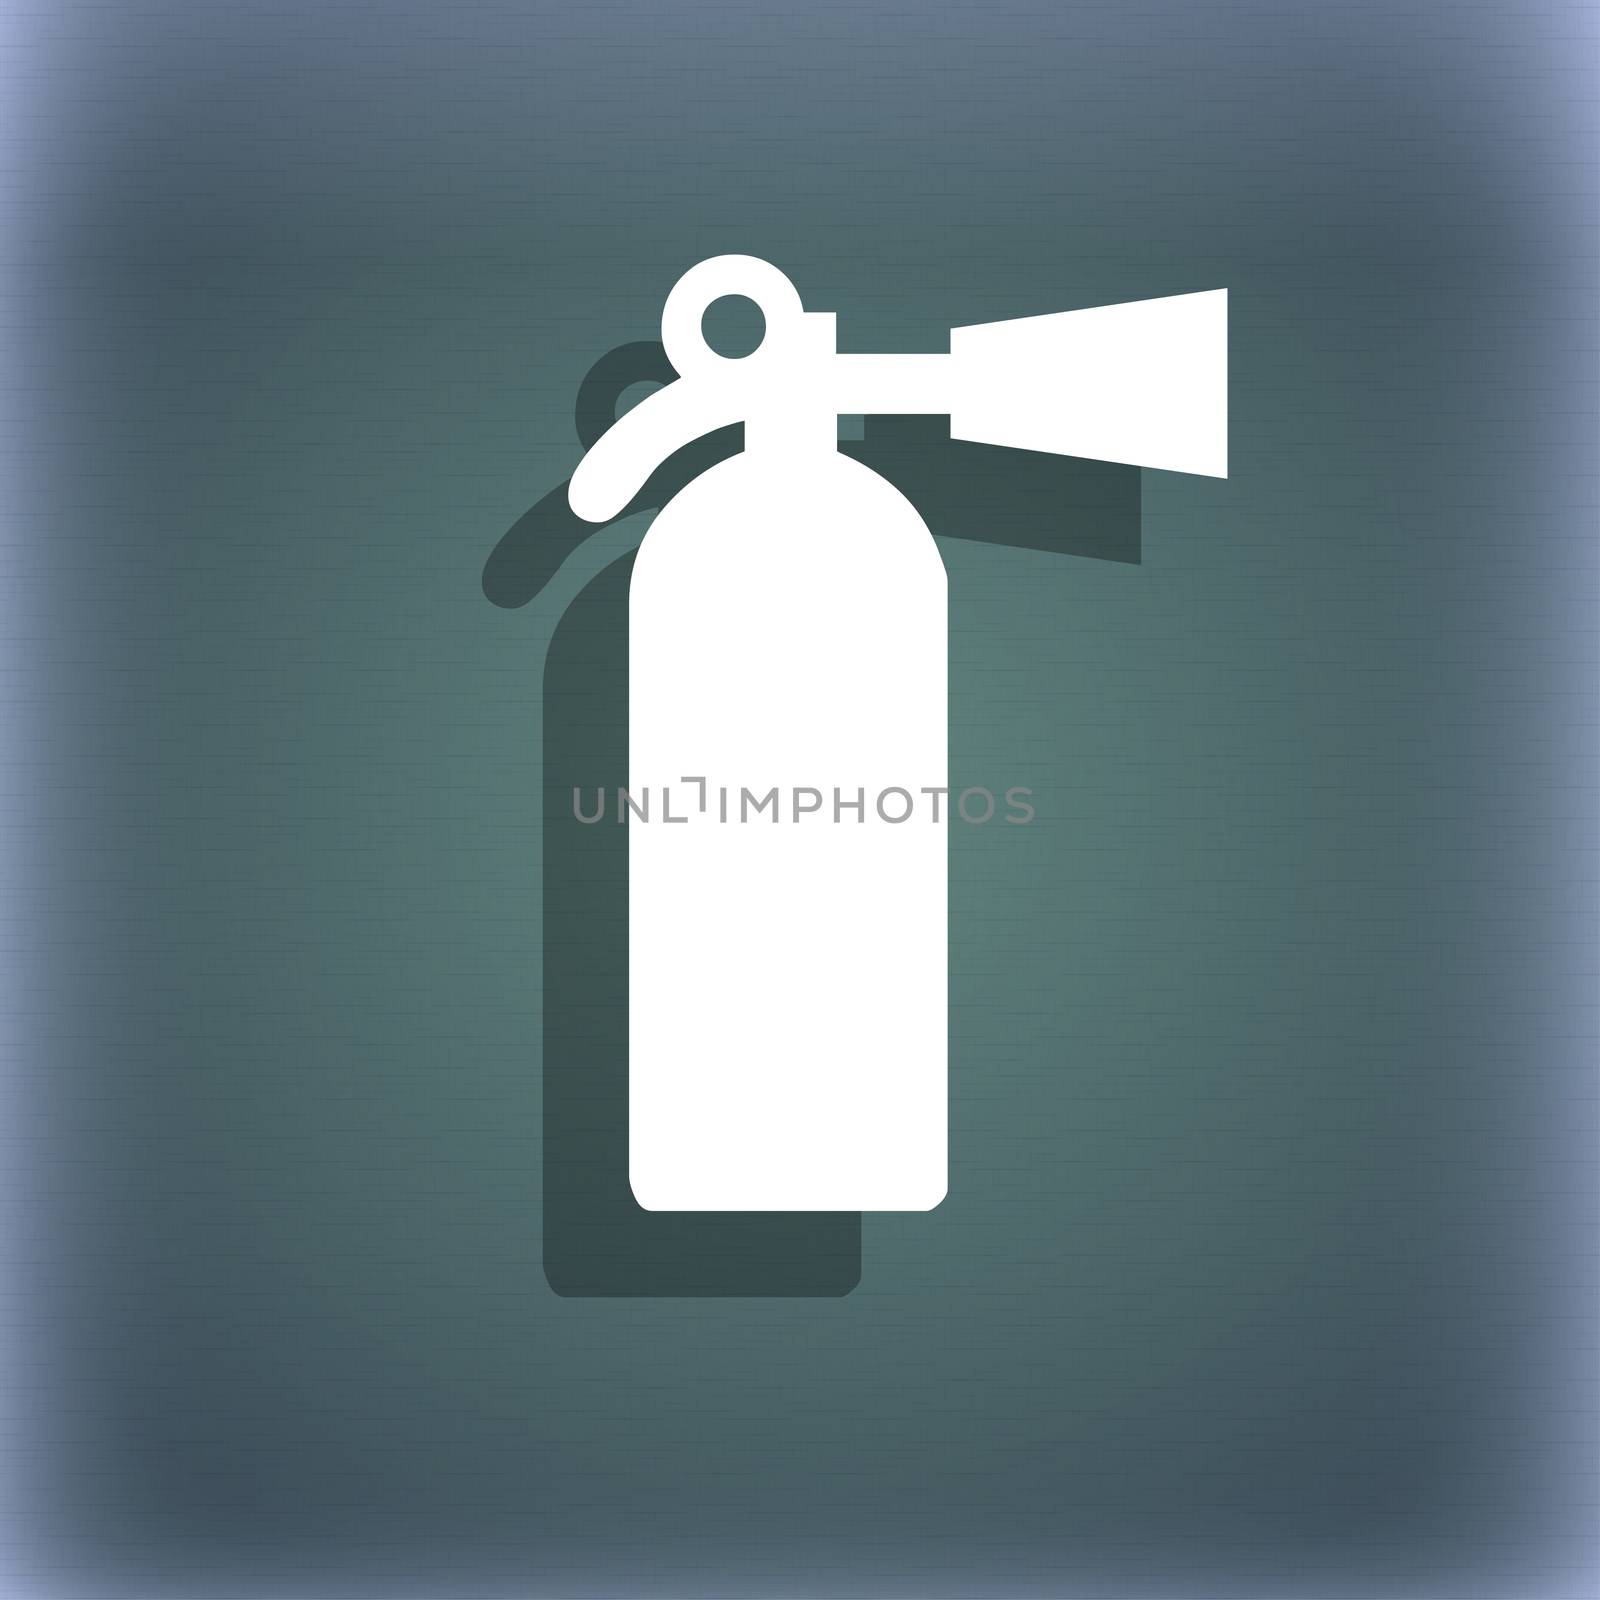 extinguisher icon symbol on the blue-green abstract background with shadow and space for your text. illustration